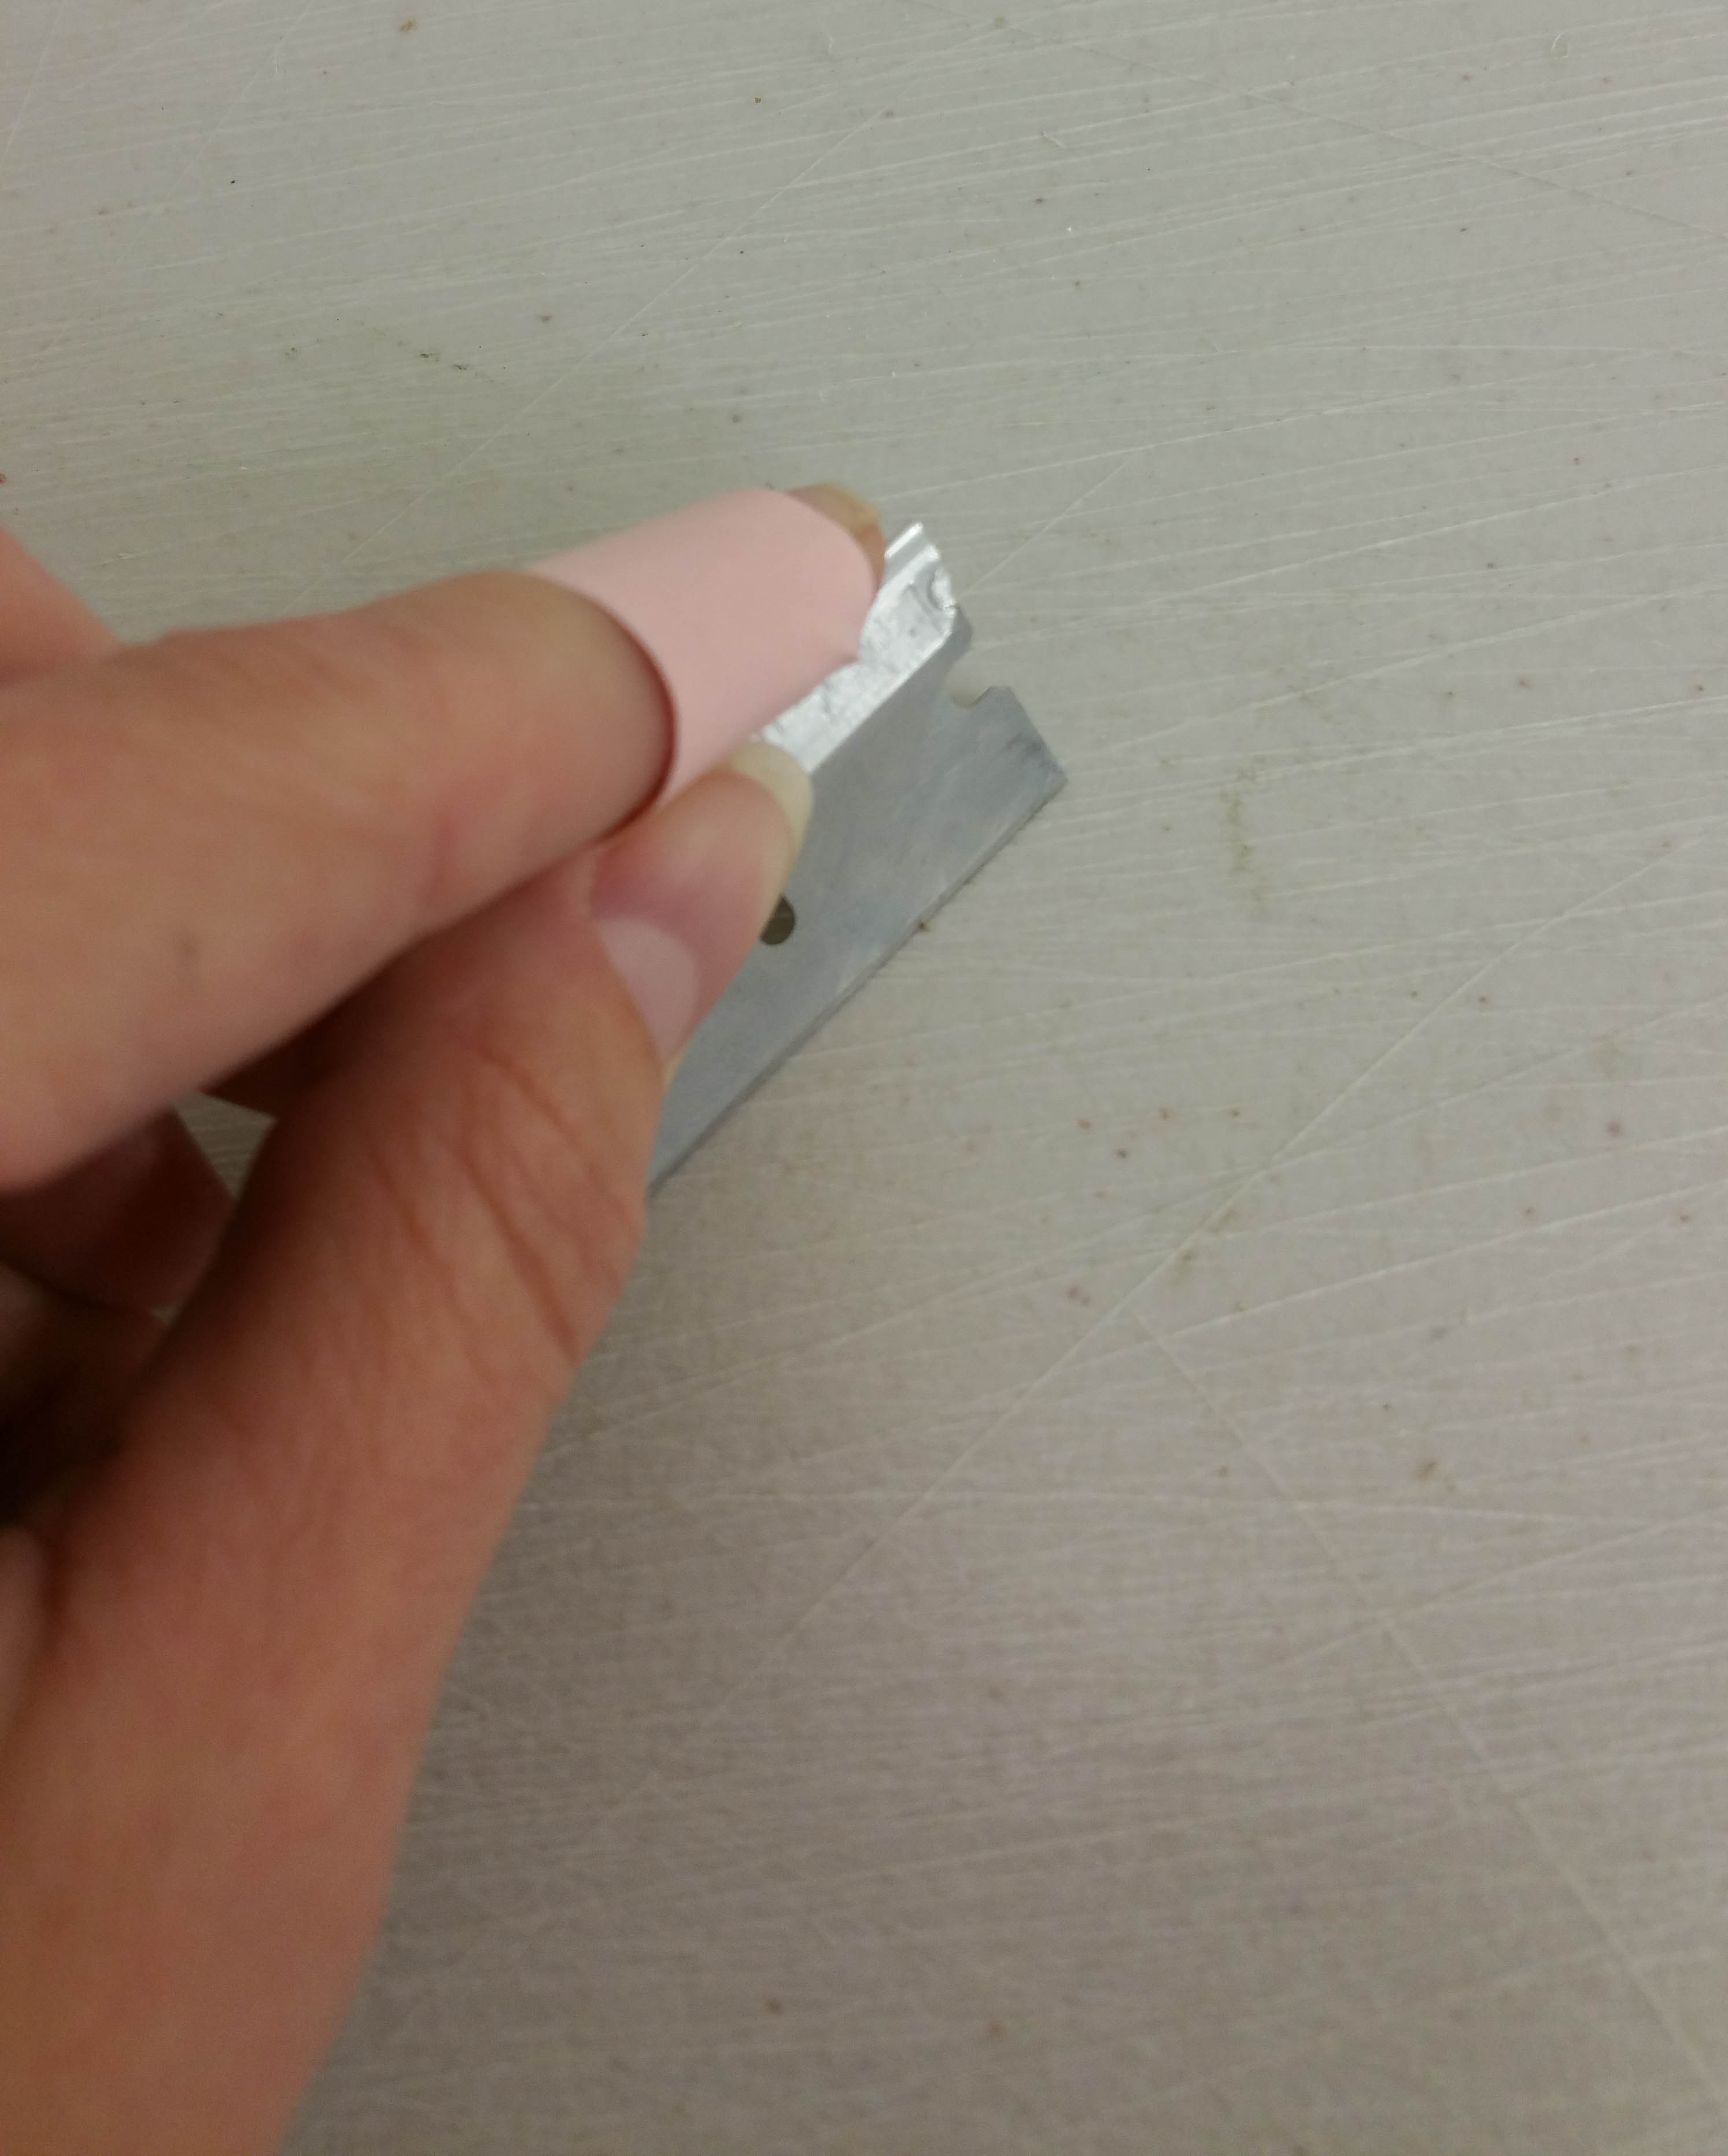 25 Real Lab Hacks from Researchers Like You - When using a straight blade, put masking tape over your finger as a second skin